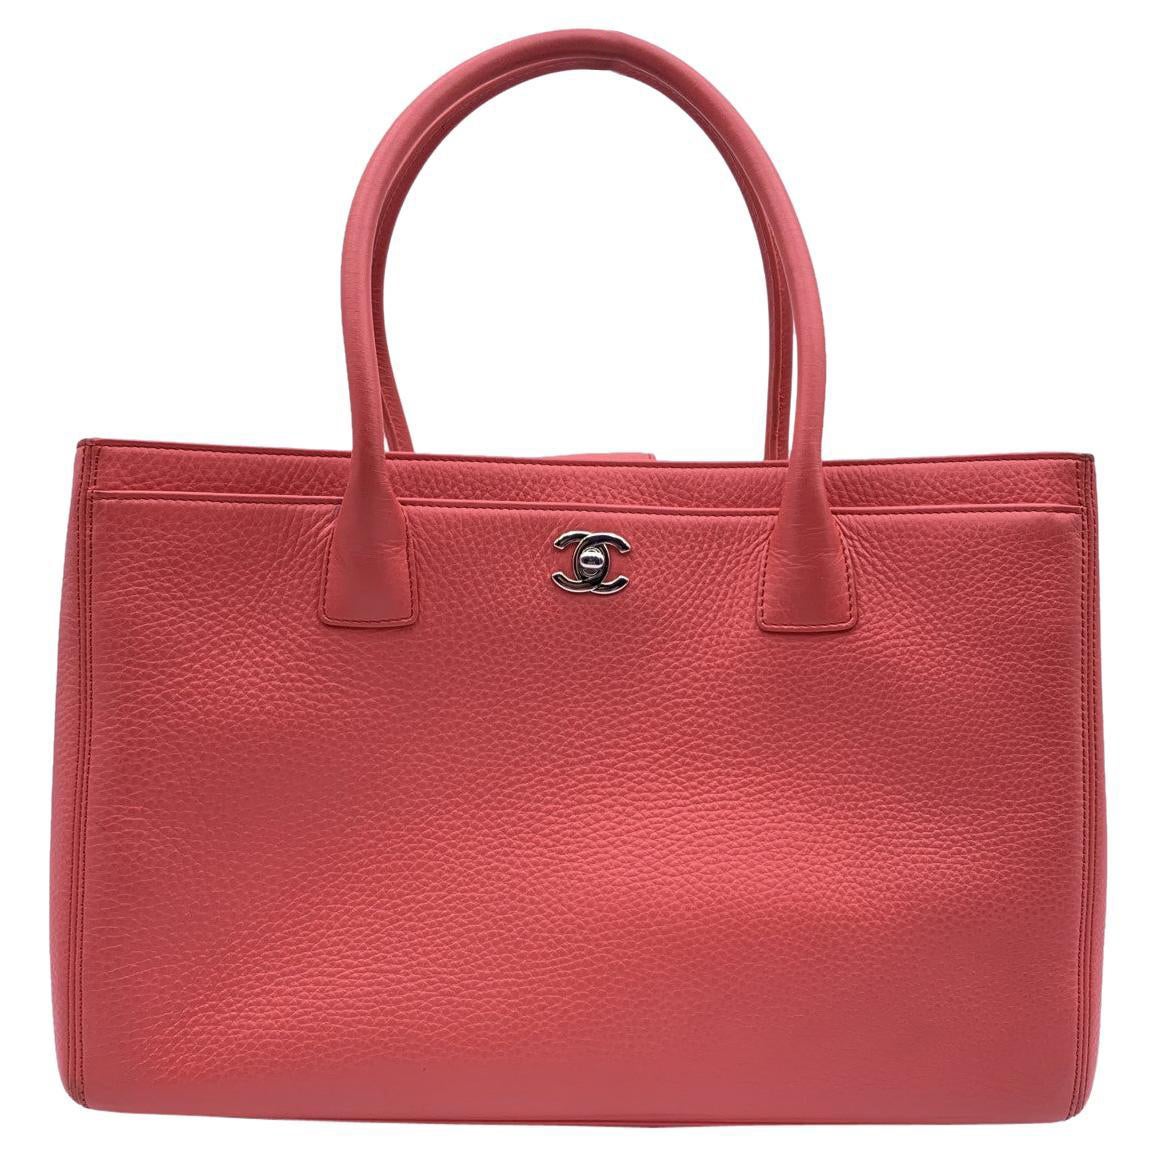 Chanel Pink Pebbled Leather Executive Tote Bag with Strap